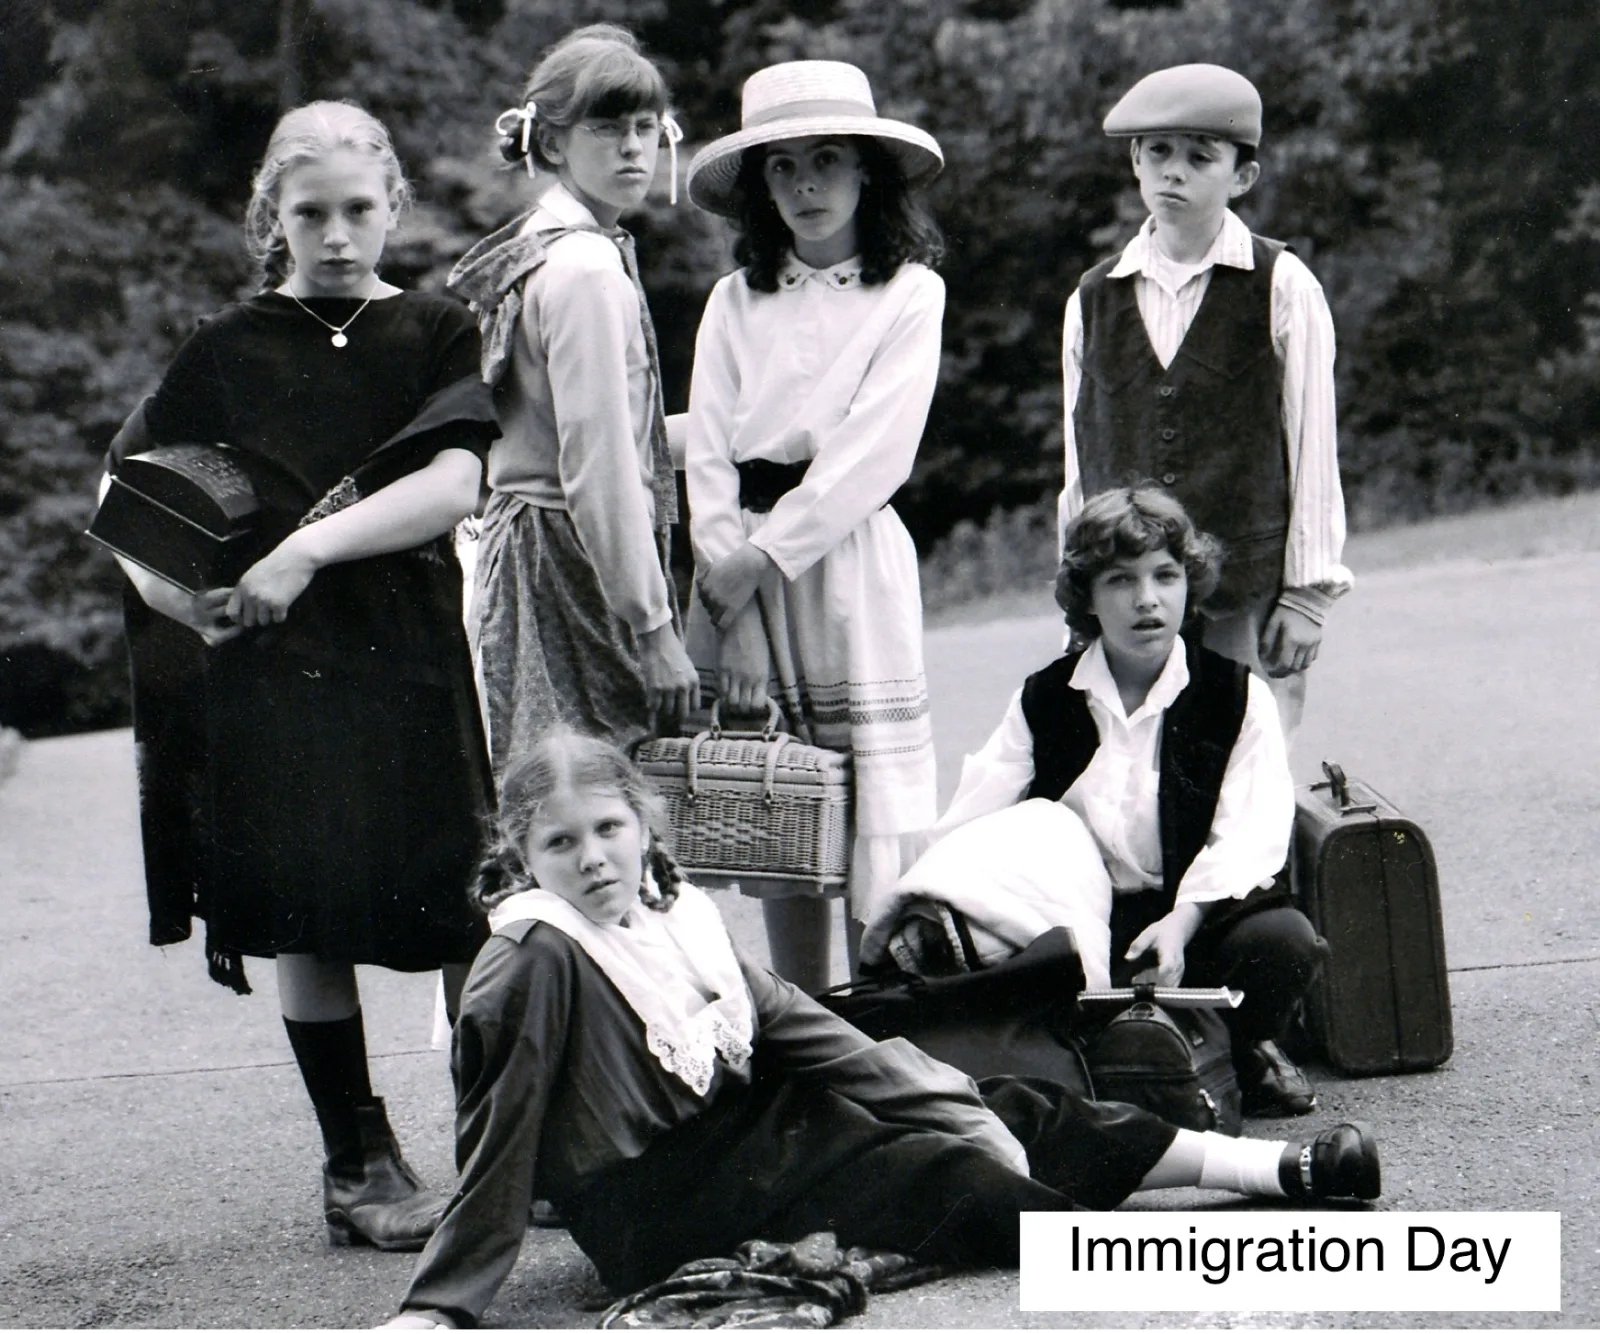 students dressed for Immigration Day